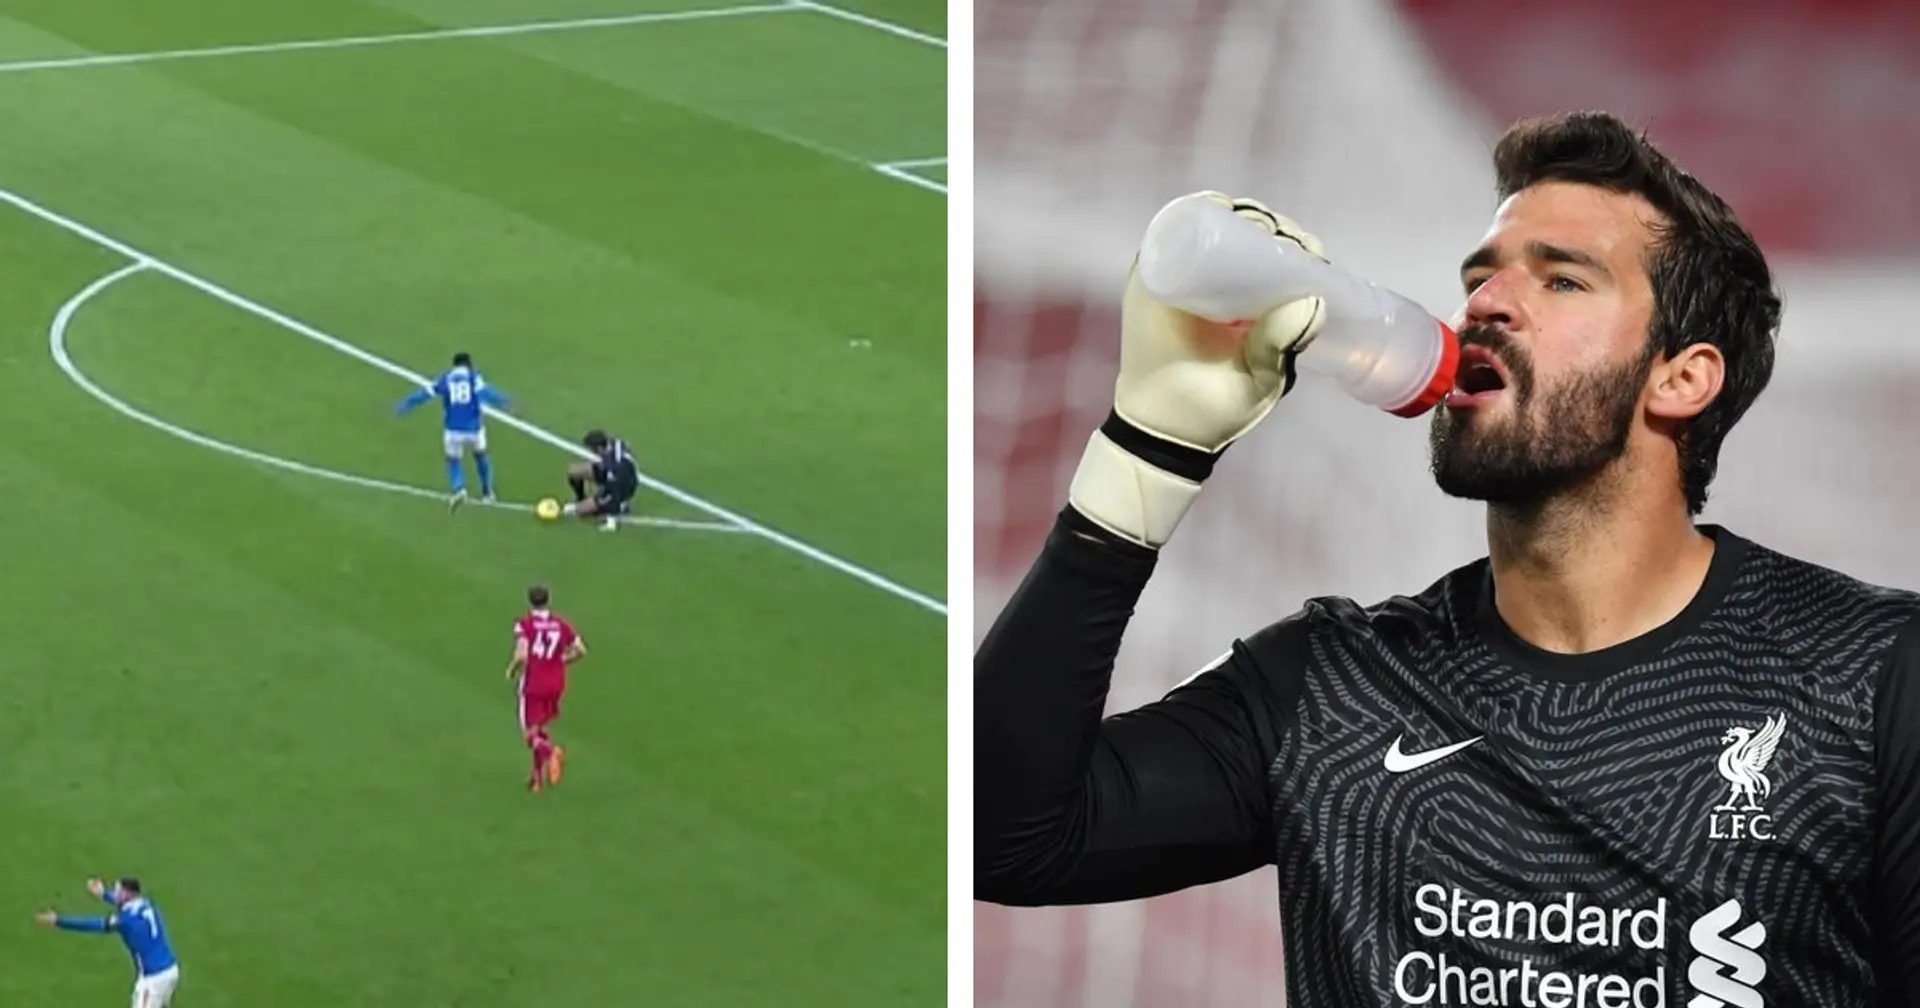 Brazilian magic: Alisson pulls off cheeky skill to get out of trouble